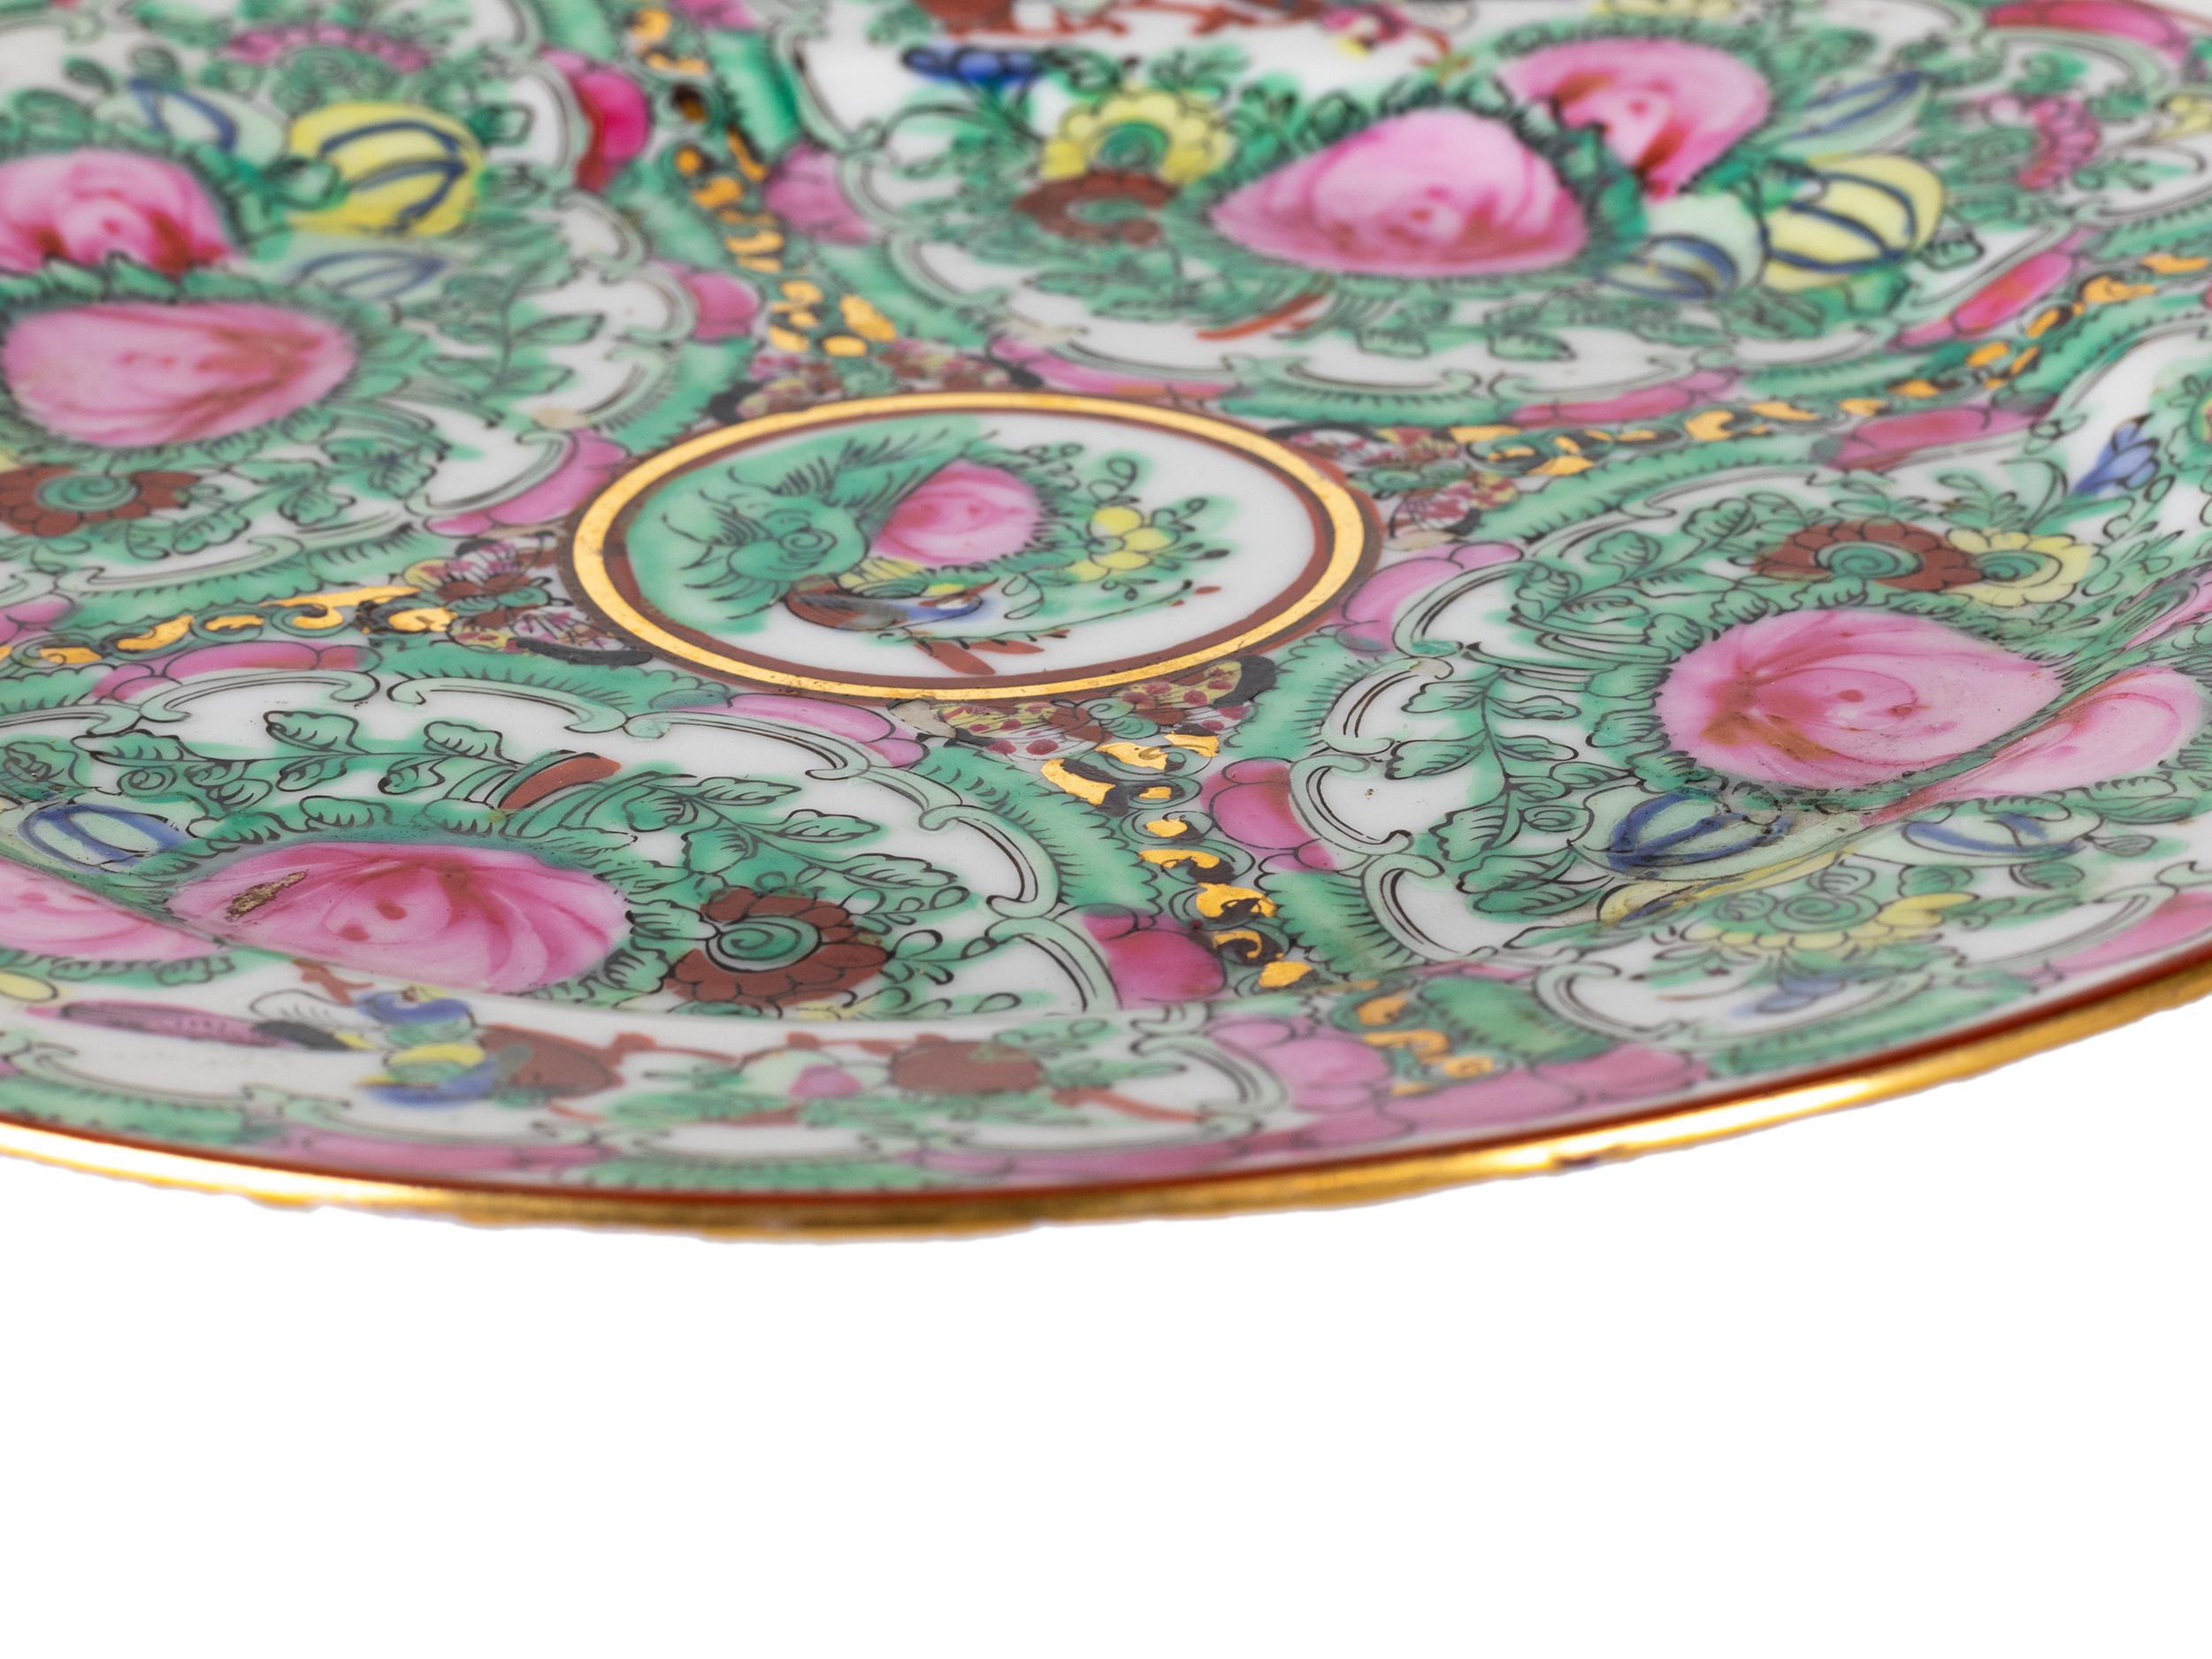 Chinese Export Macau porcelain small platter with the mark with pink and green colors, golden trim and floral design.